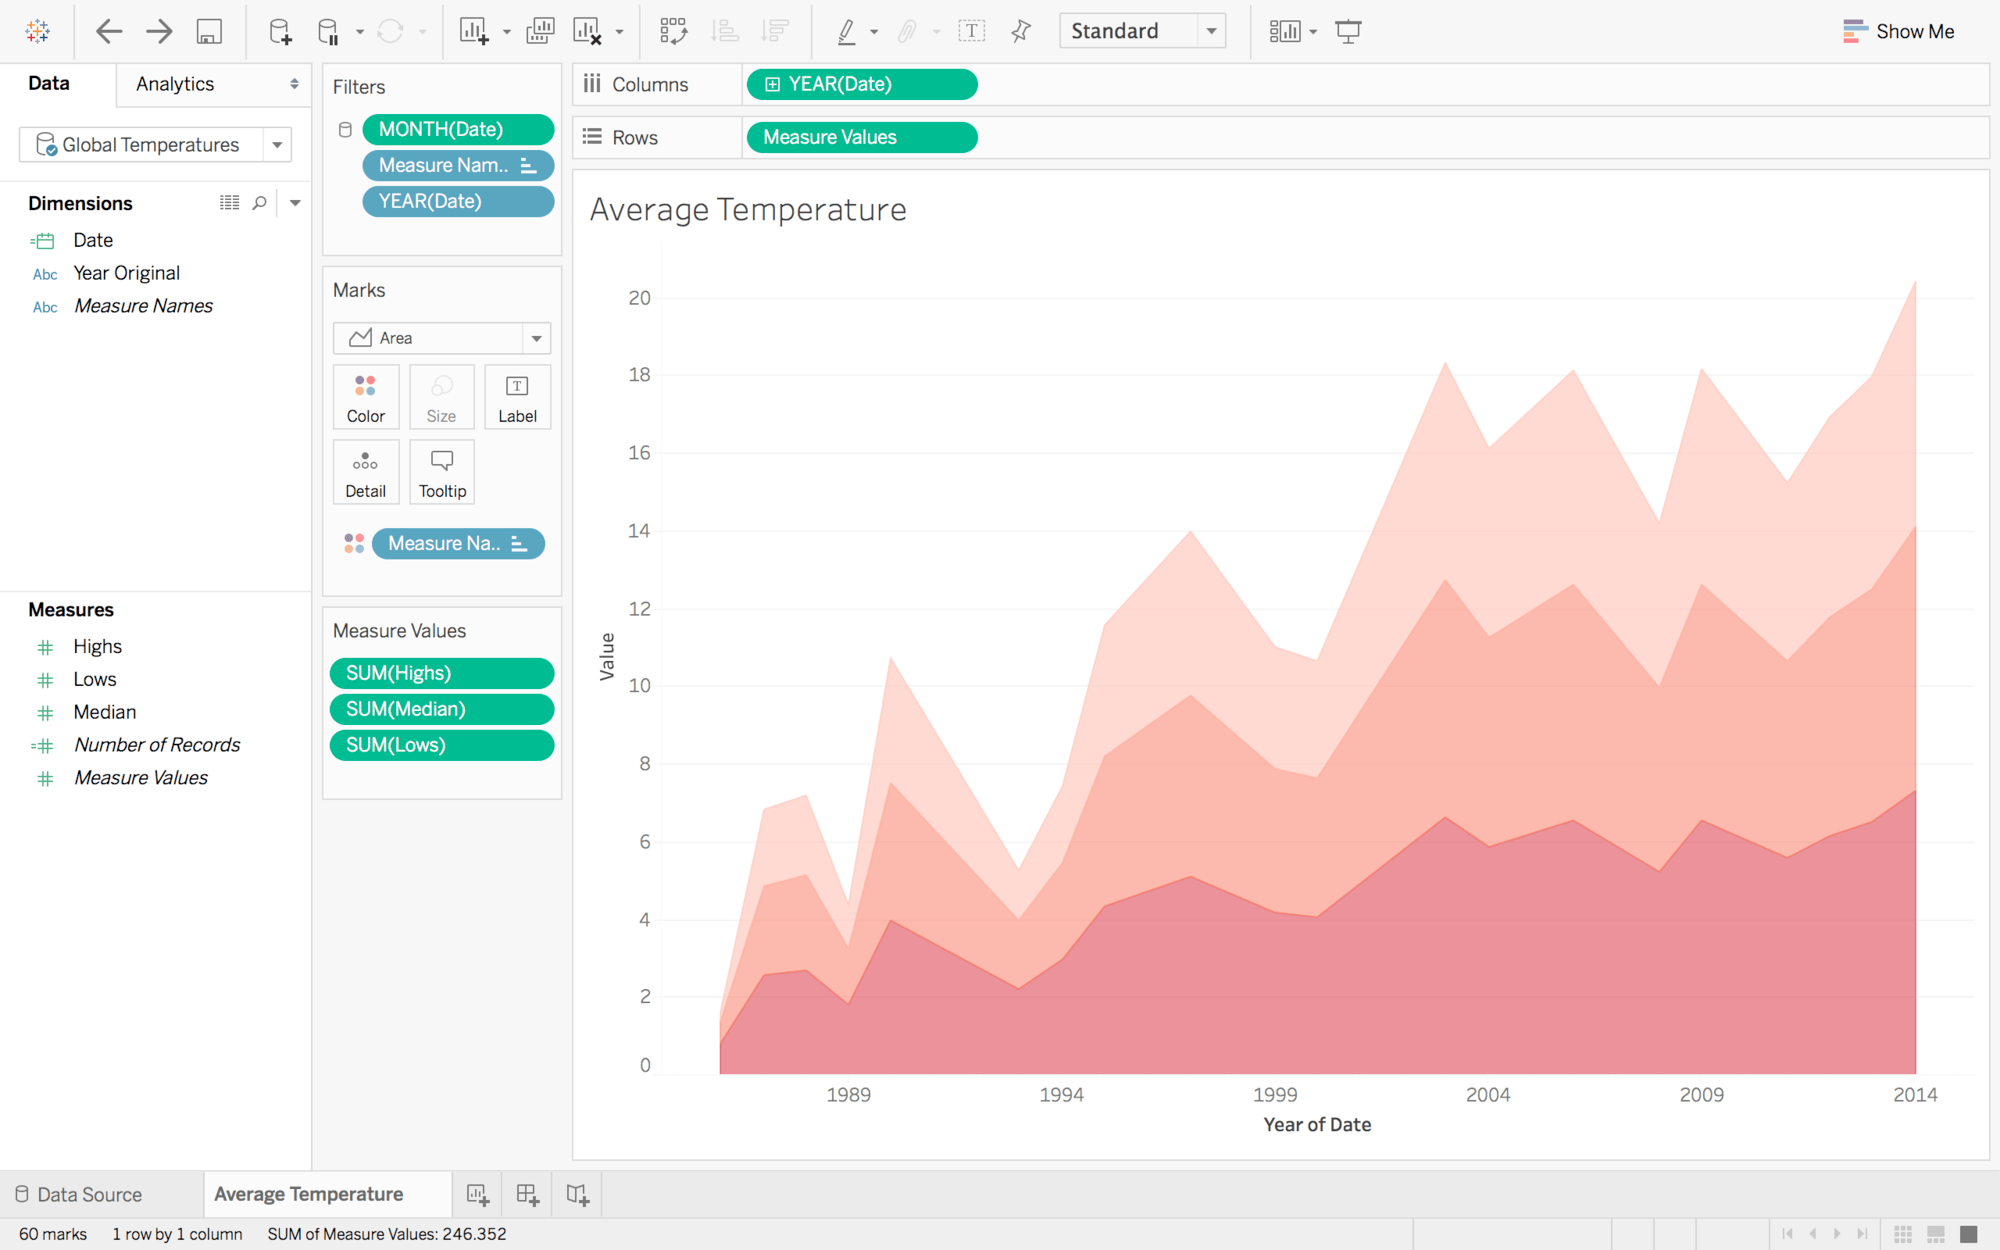 A Tableau Workbook demonstrating a time series analysis in use